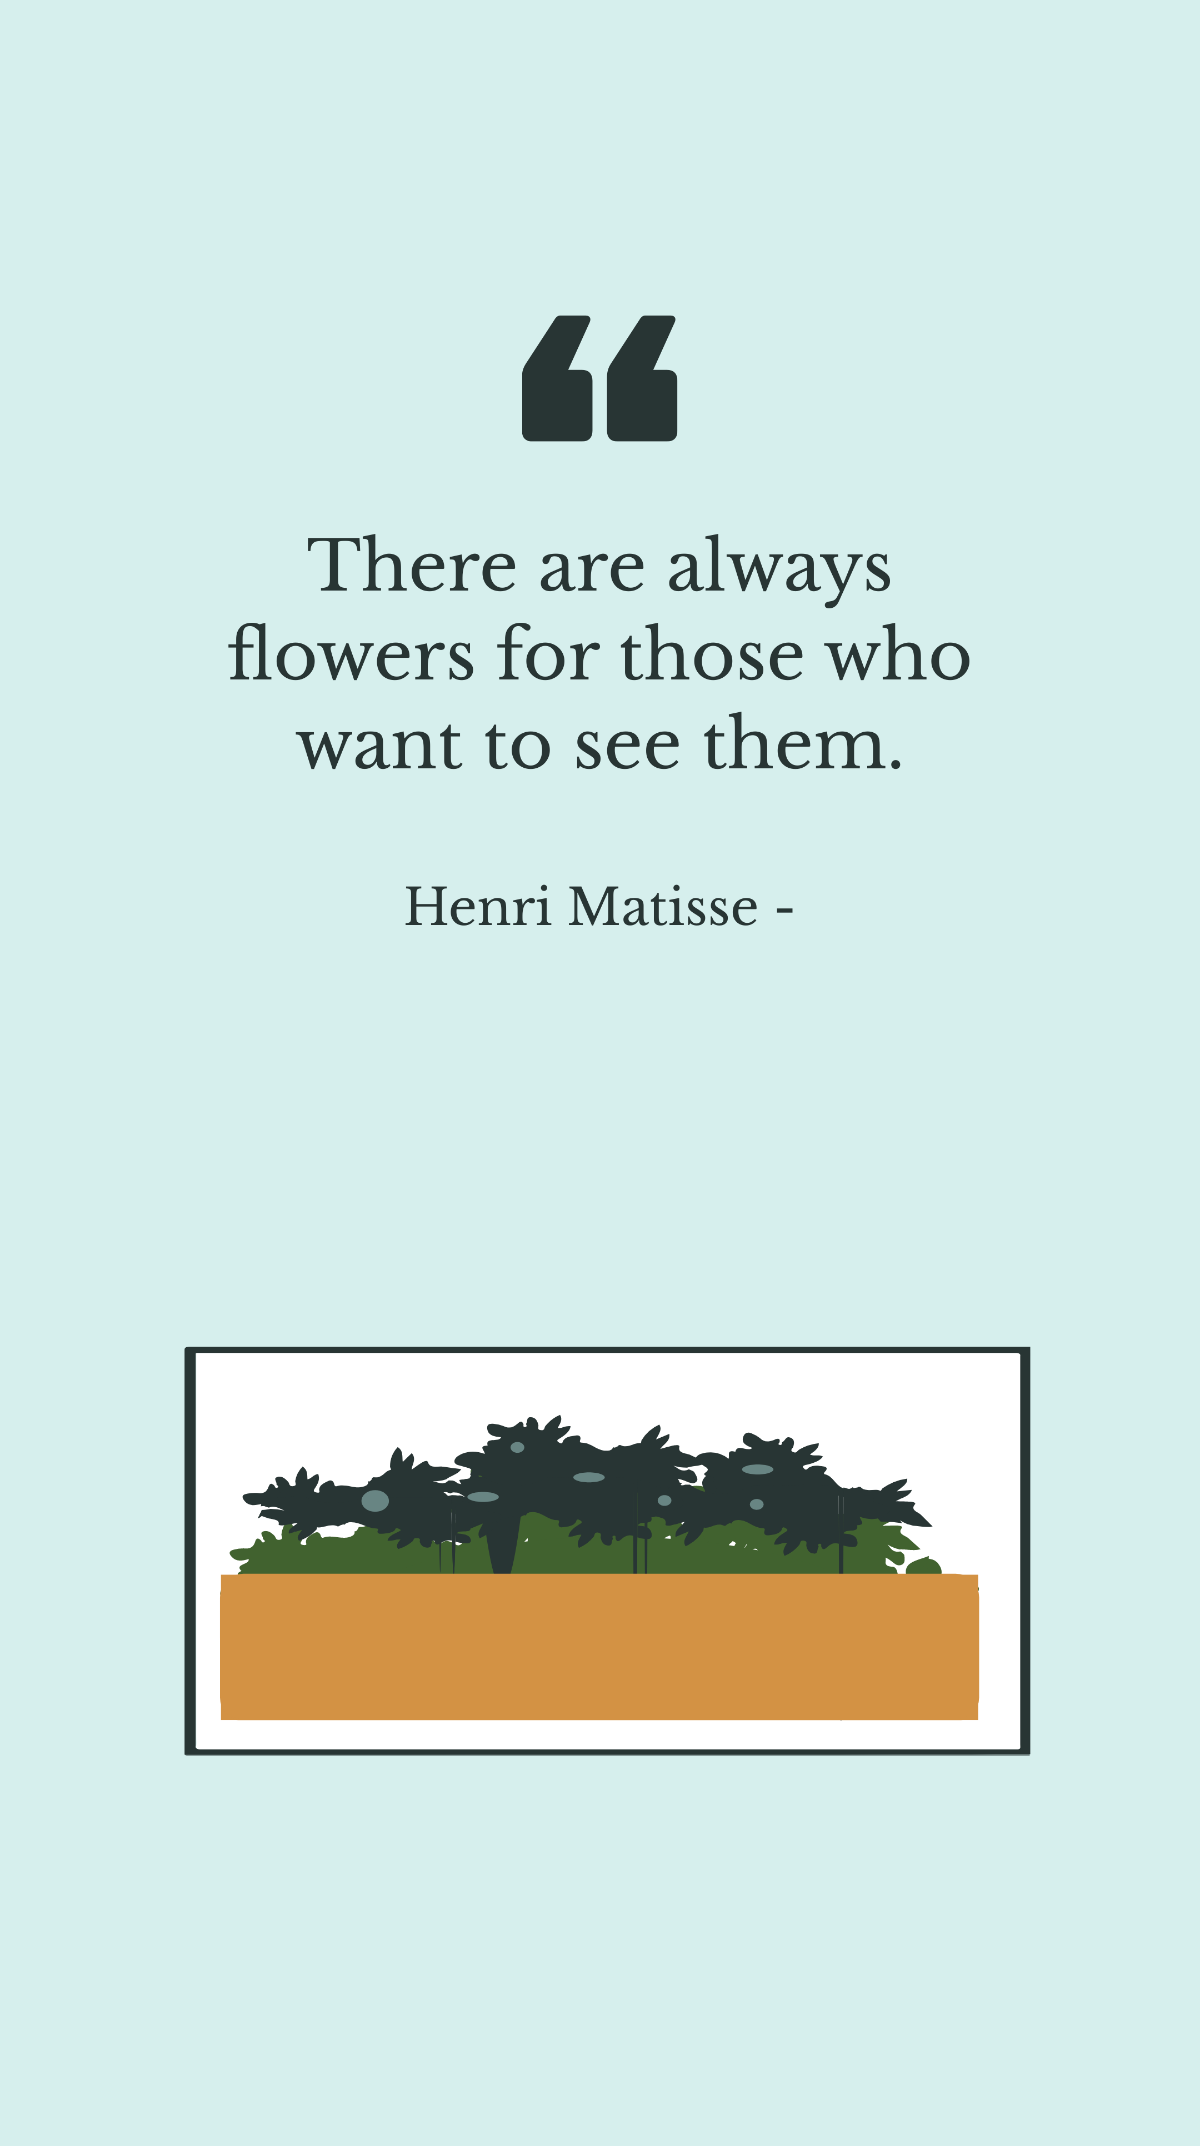 Free Henri Matisse - There are always flowers for those who want to see them. Template